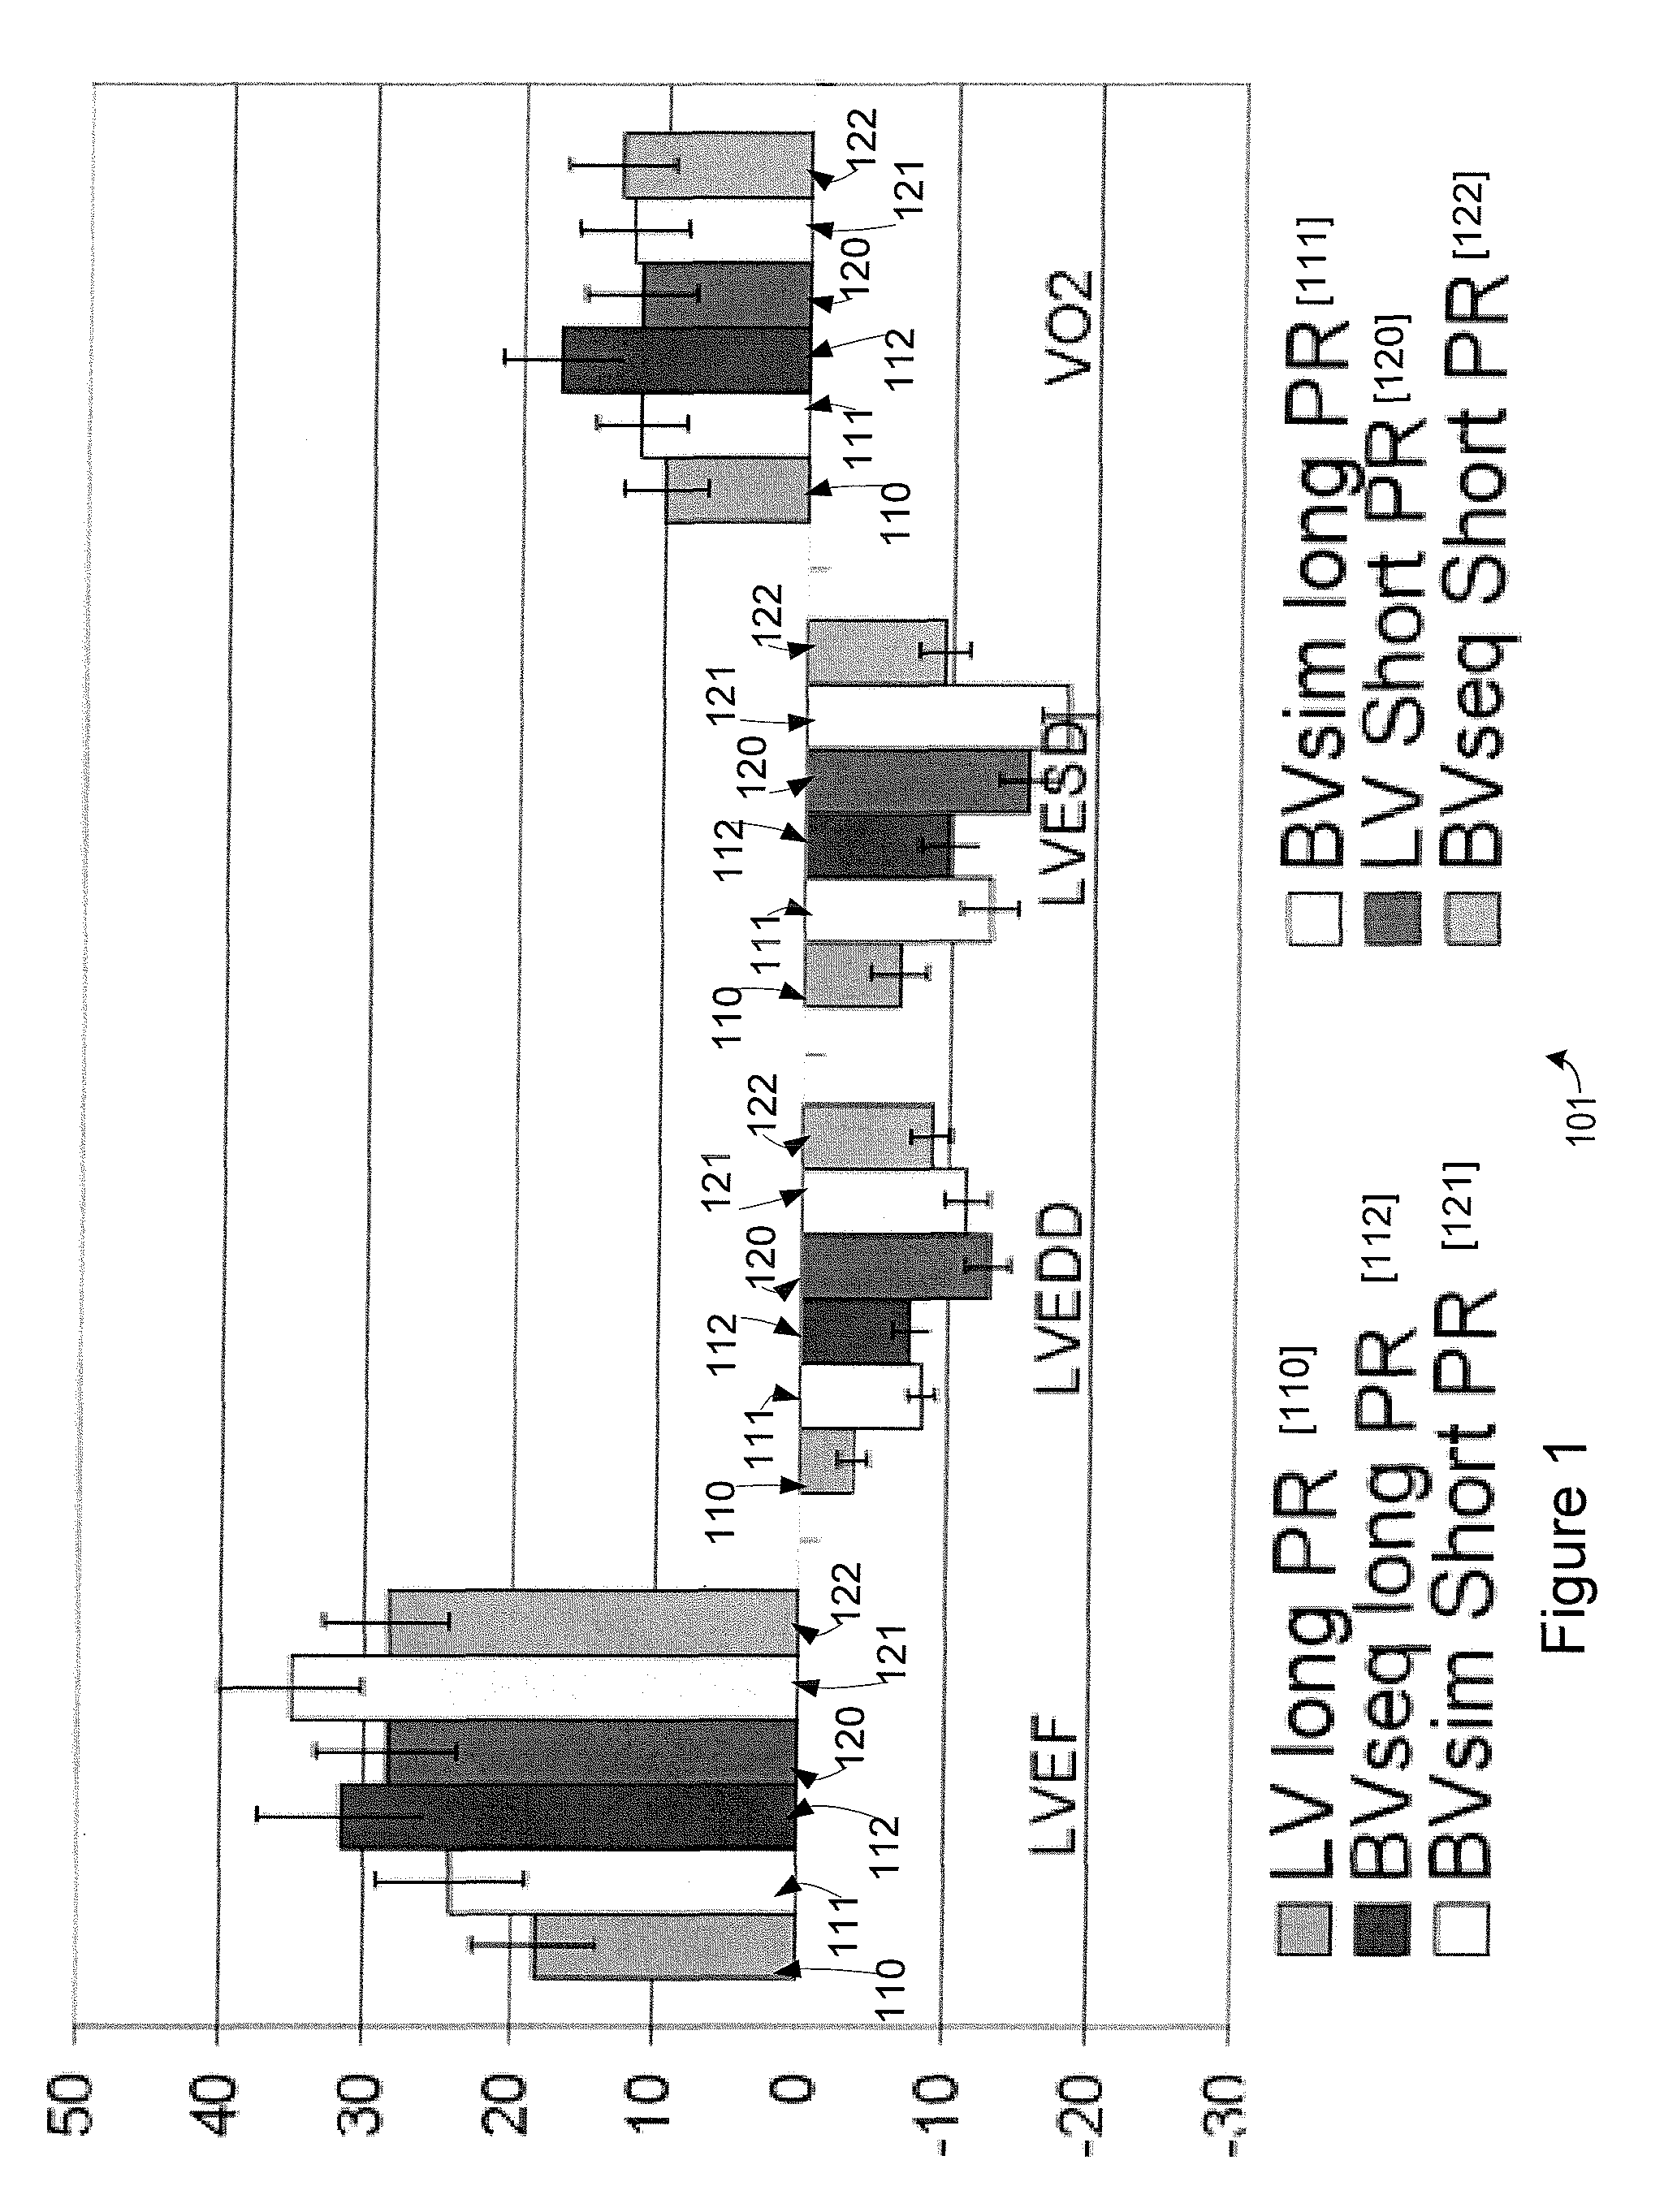 Methods and apparatuses for cardiac resynchronization therapy mode selection based on intrinsic conduction